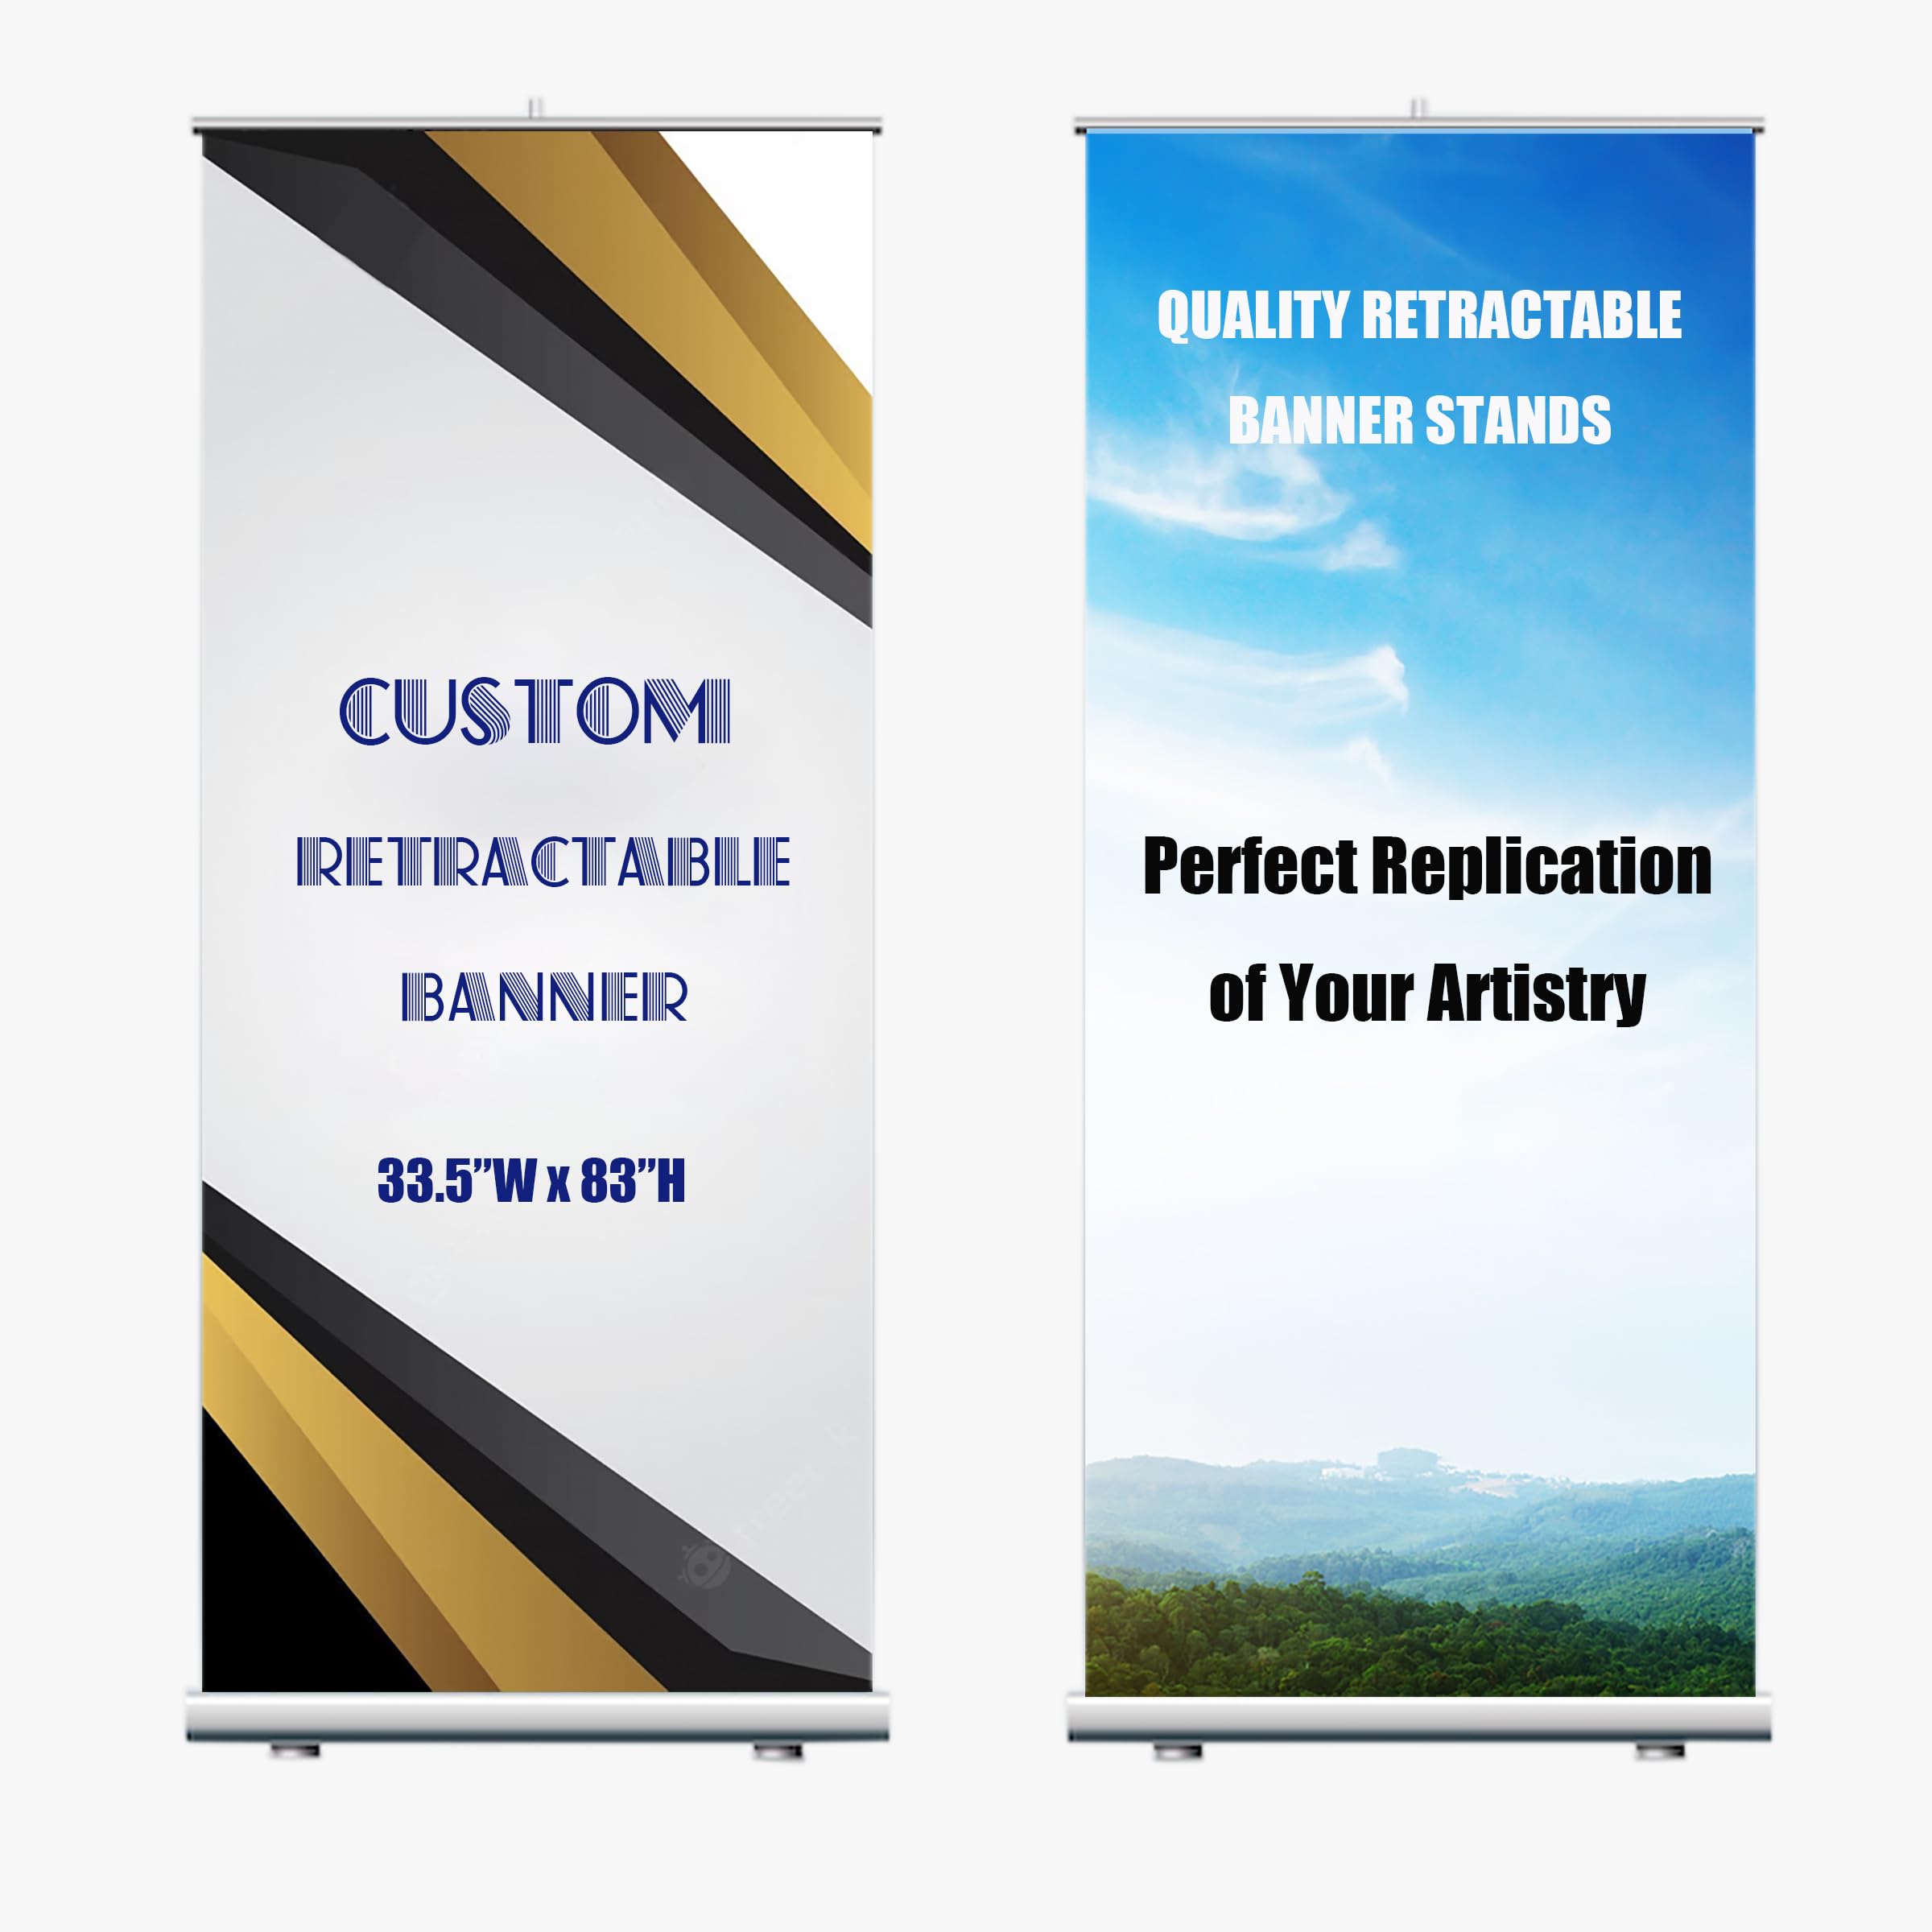 Banner Materials and Print Quality: What You Need to Know